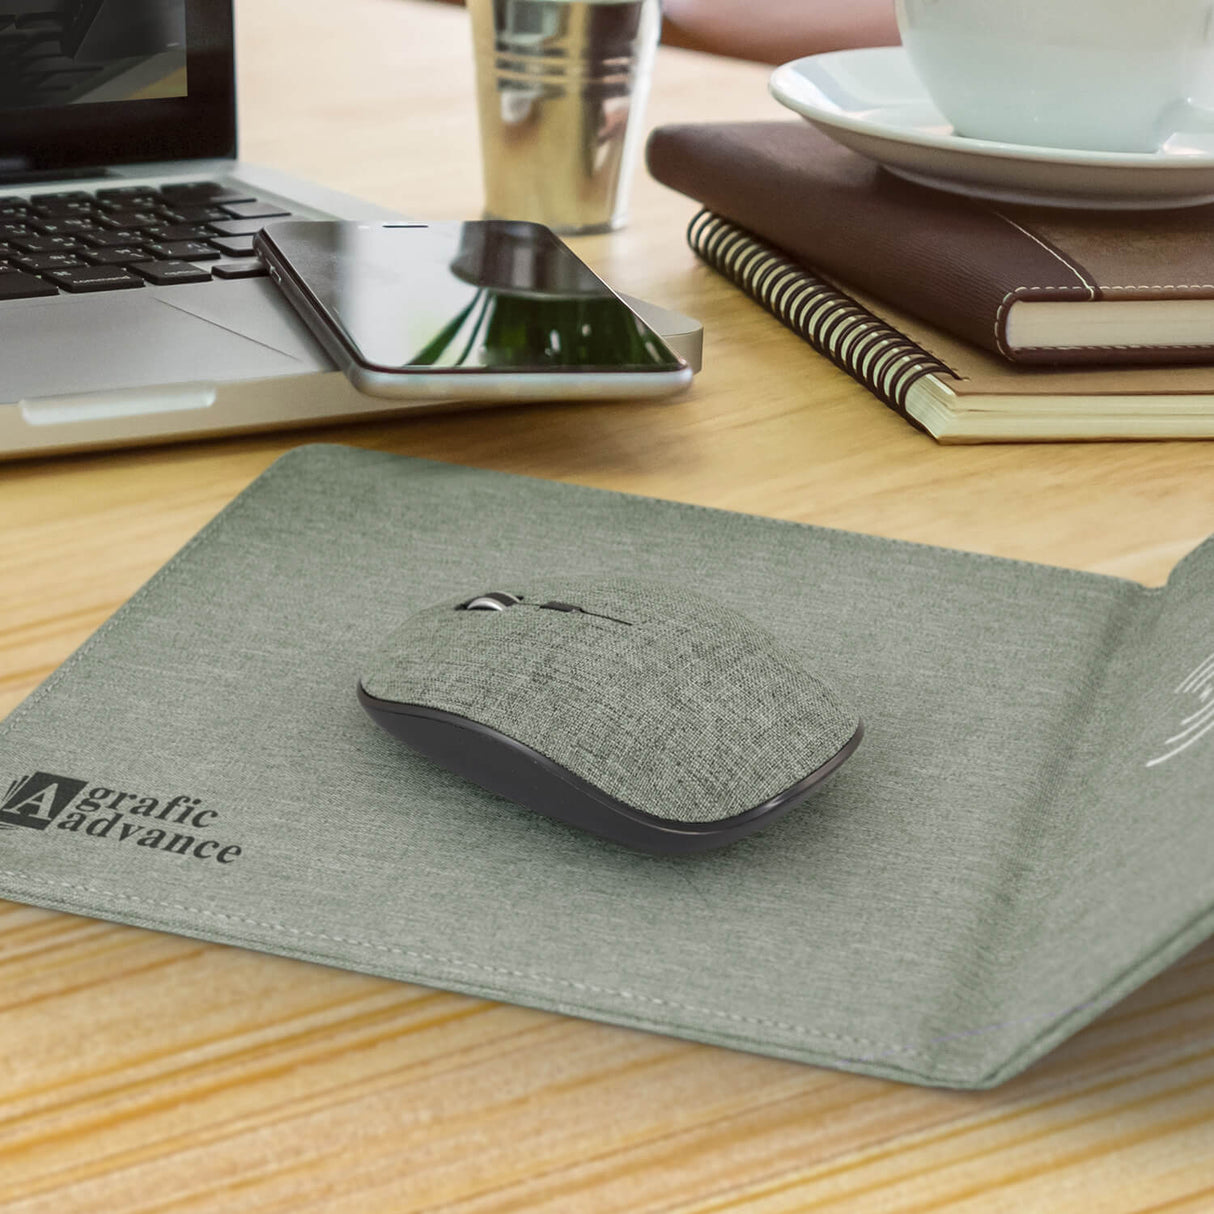 Greystone Wireless Travel Mouse - Printed